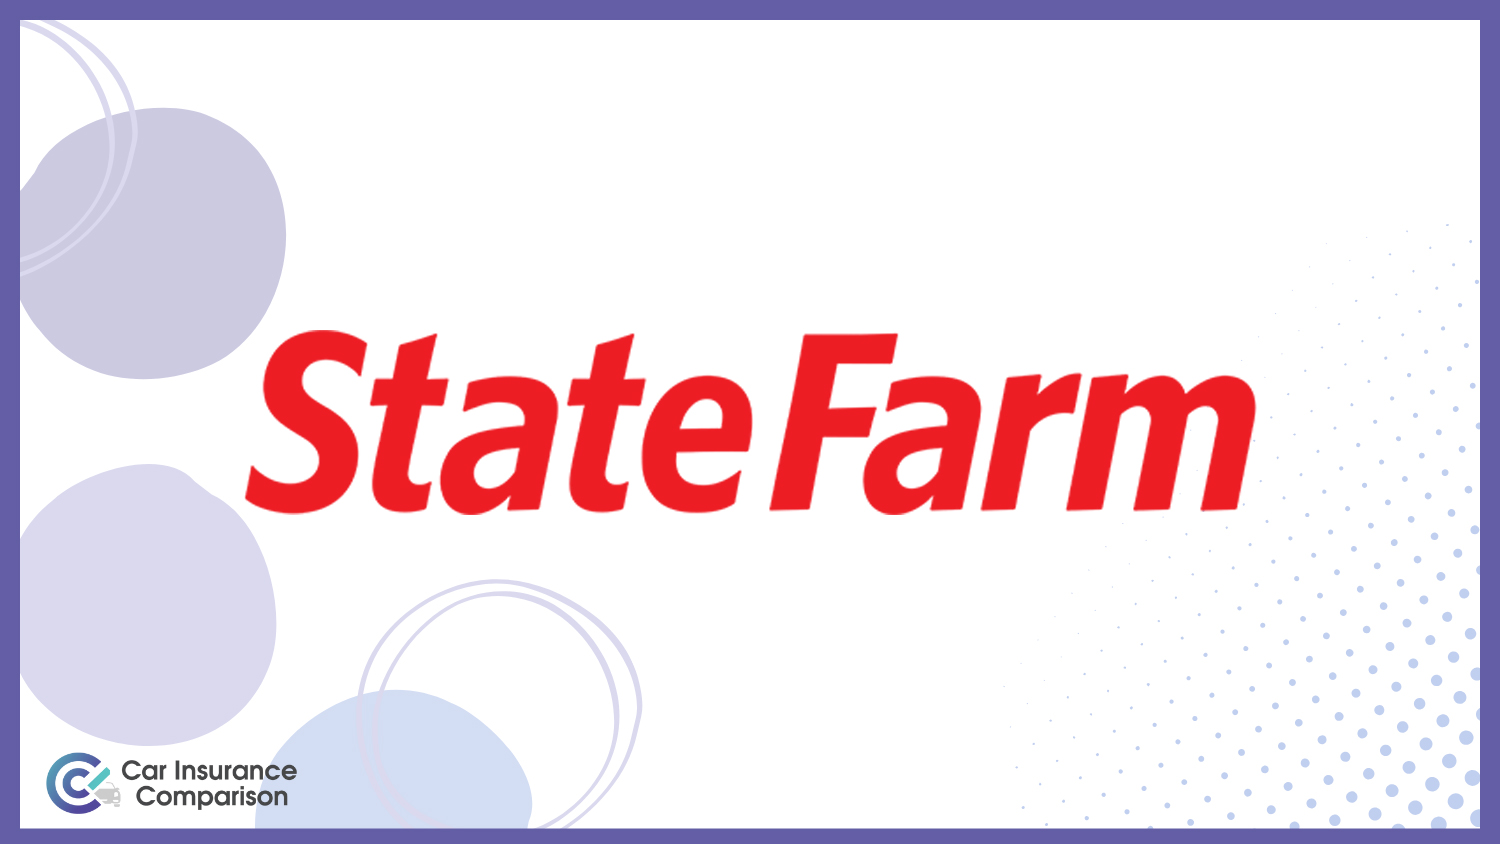 State Farm: Best Car Insurance for a Bad Driving Record